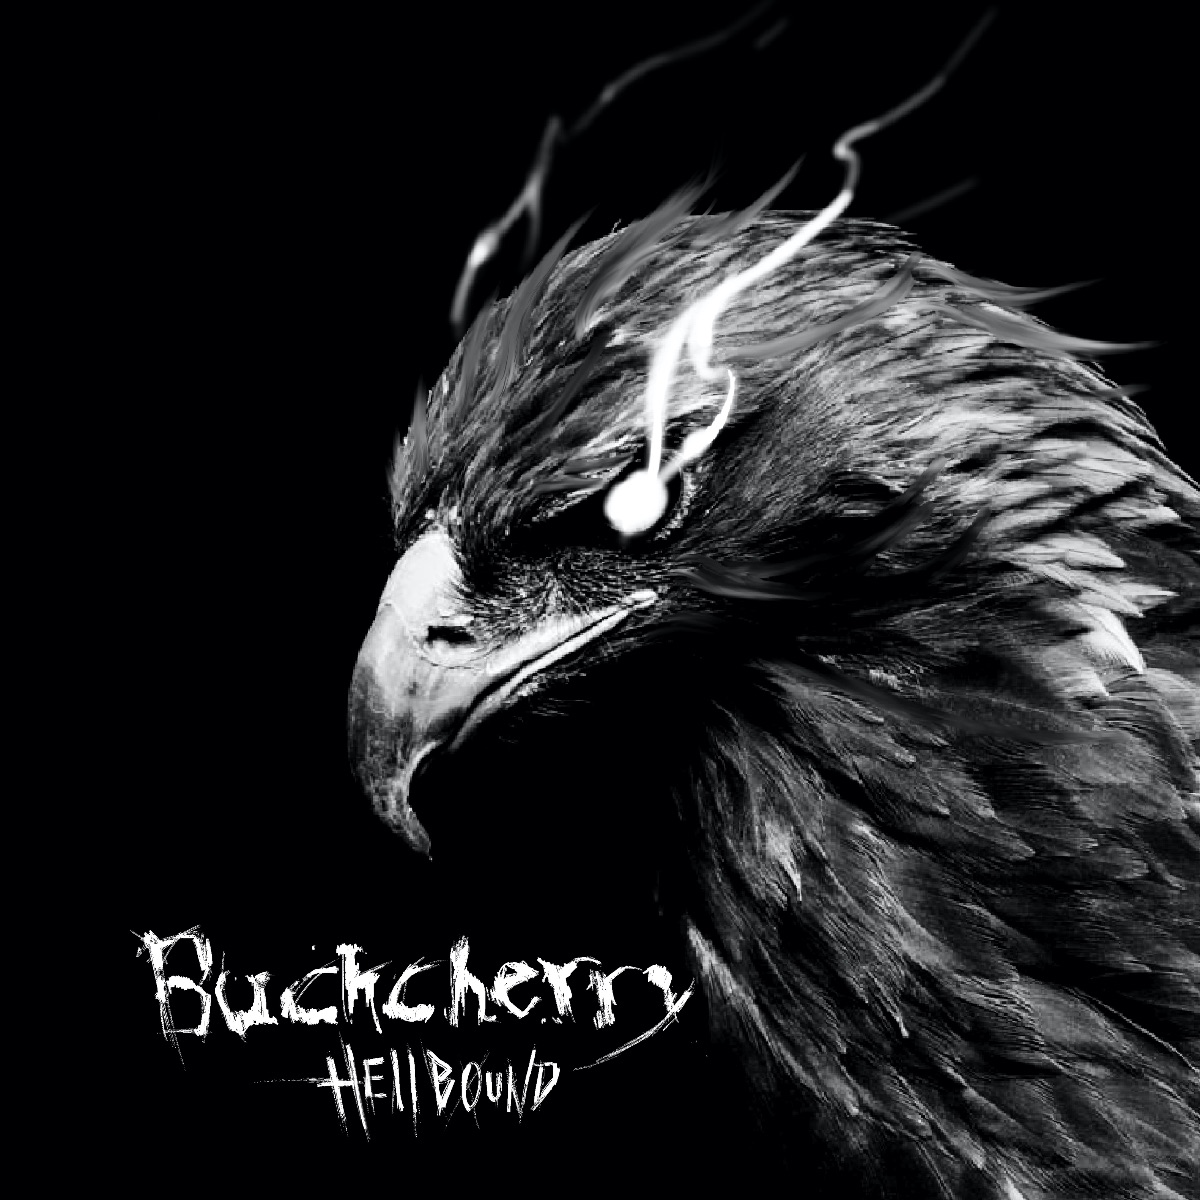 Buckcherry Announce June 25 Release Date For "Hellbound"